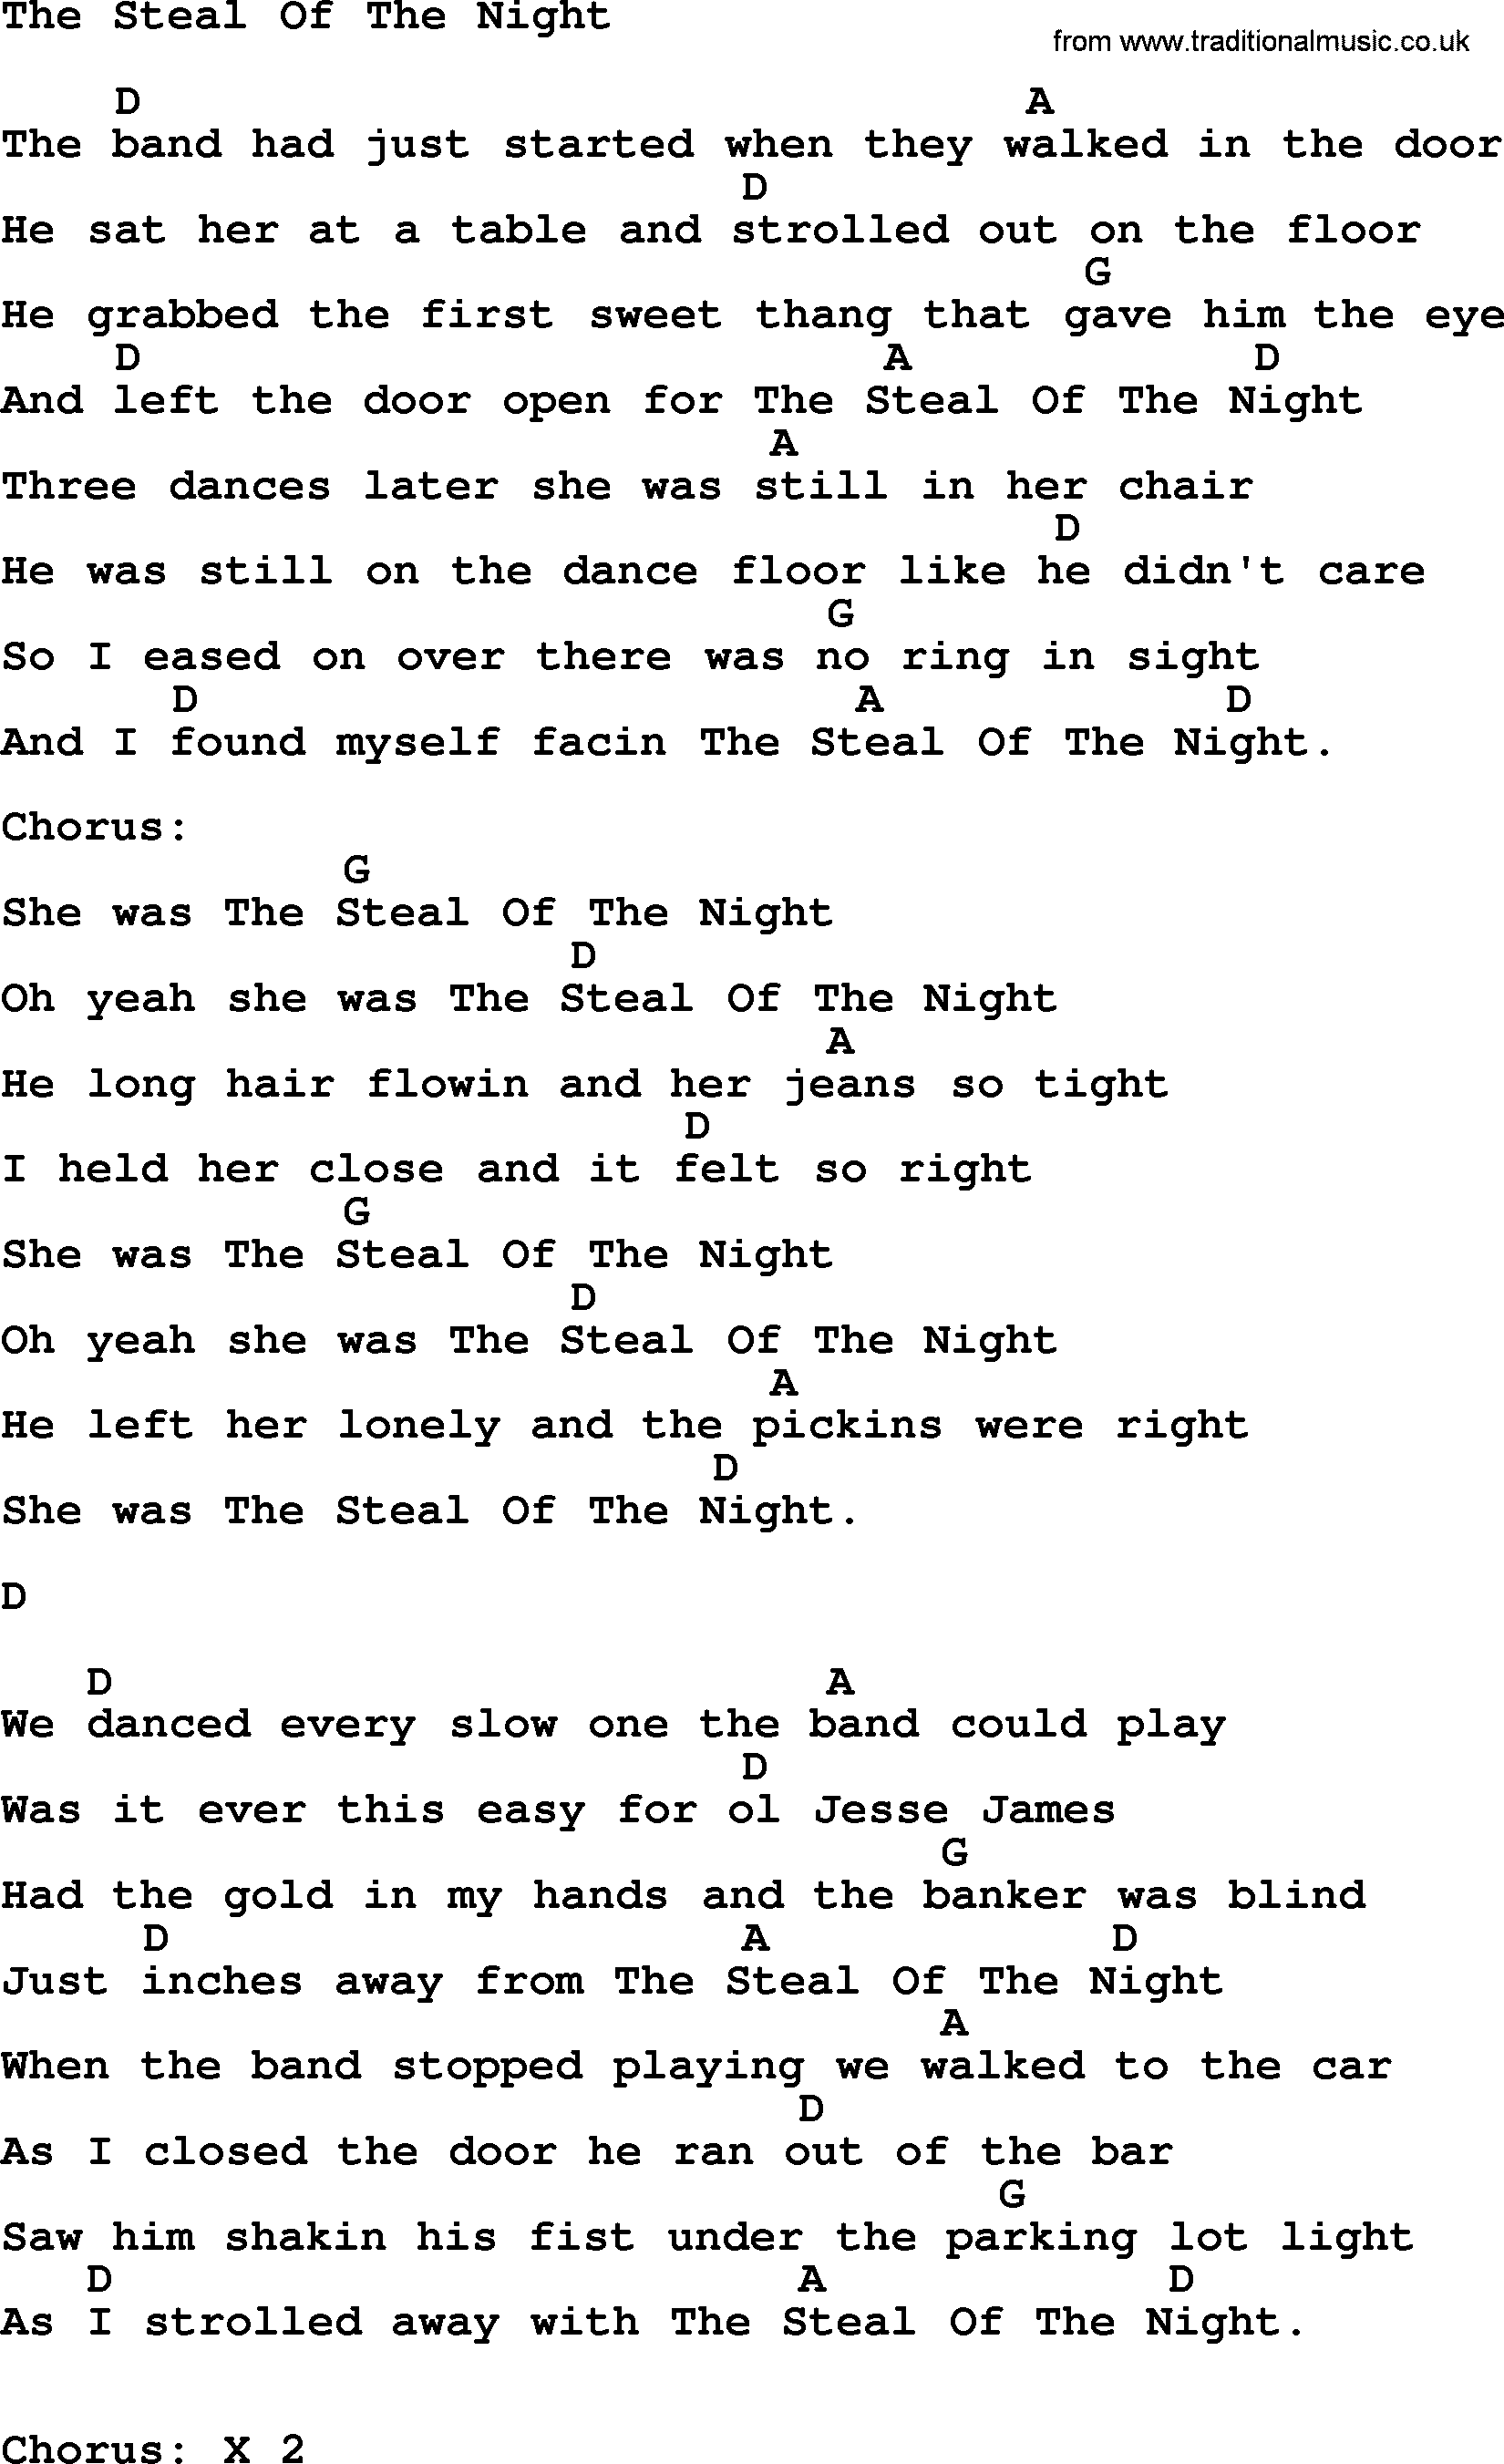 George Strait song: The Steal Of The Night, lyrics and chords